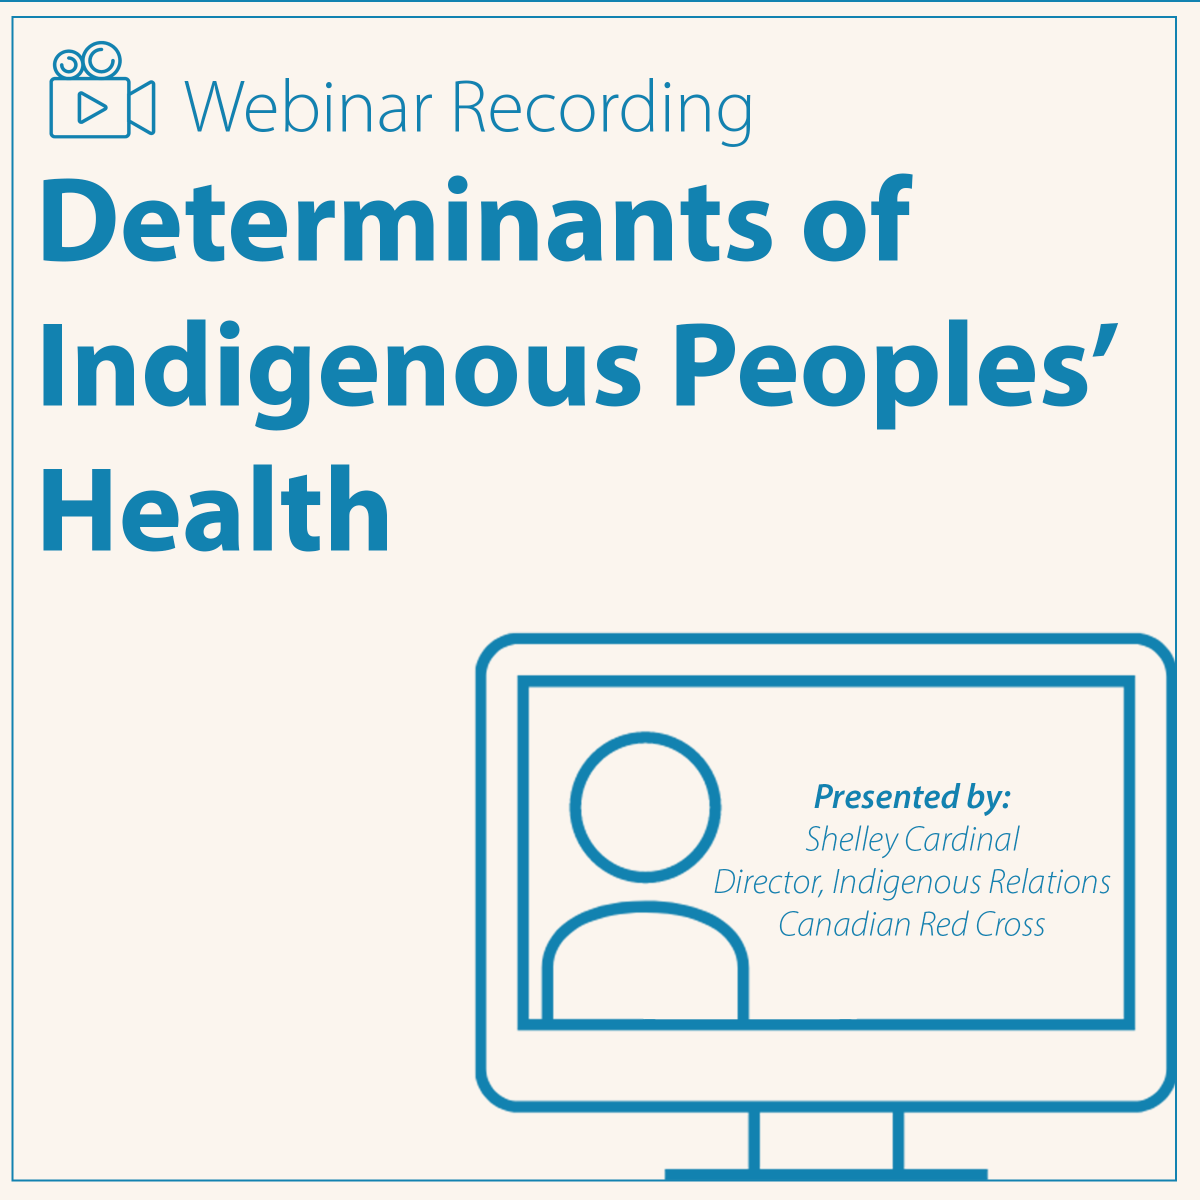 What a great webinar! 

Tks for sharing this @PREVNet and to Shelley Cardinal @redcrosscanada for your insights!

#socialdeterminantsofhealth #IndigenousPeoples #Health https://t.co/gJ4ihcBPTs